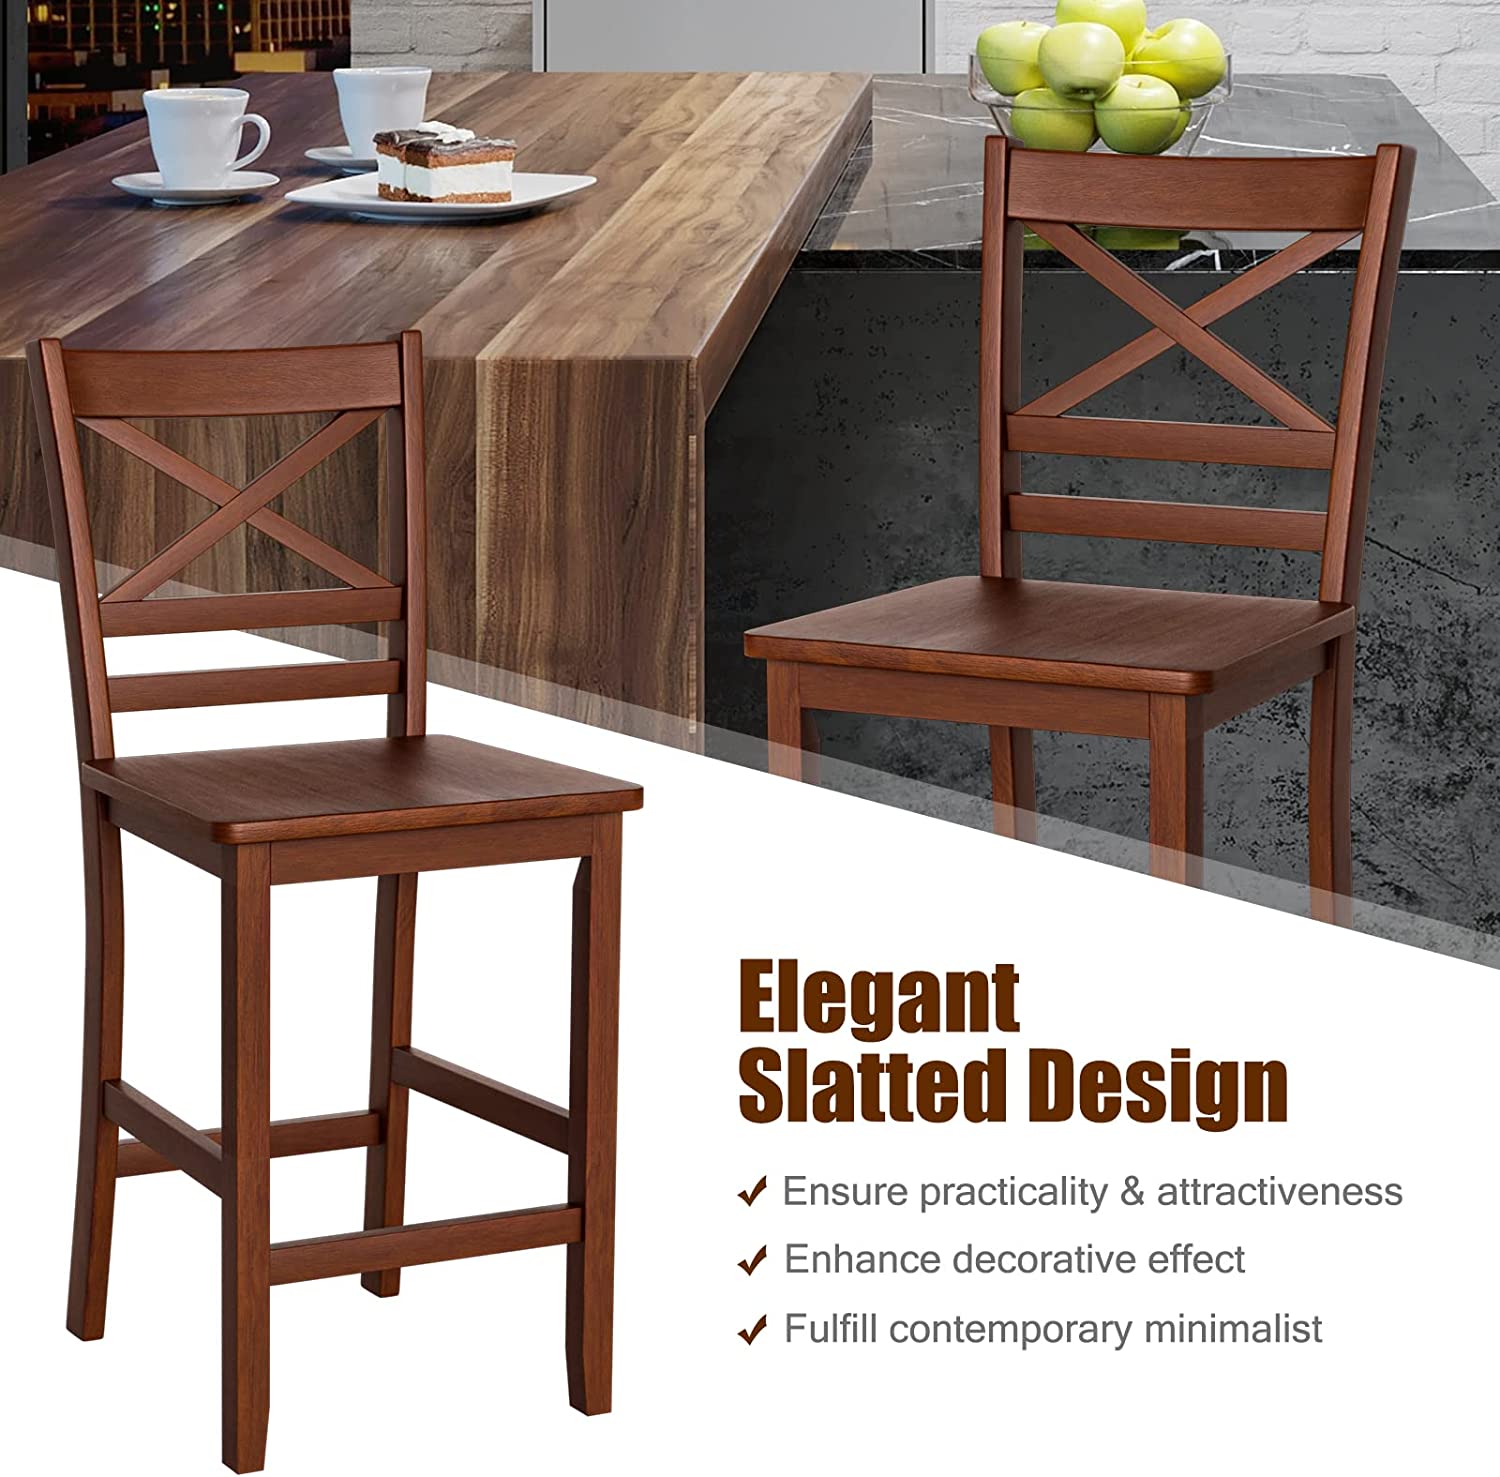 Chairliving Set of 2 Bar Stools 24 Inch Antique Kitchen Counter Height Chairs with Wooden X-Shaped Backrest and Rubber Wood Legs